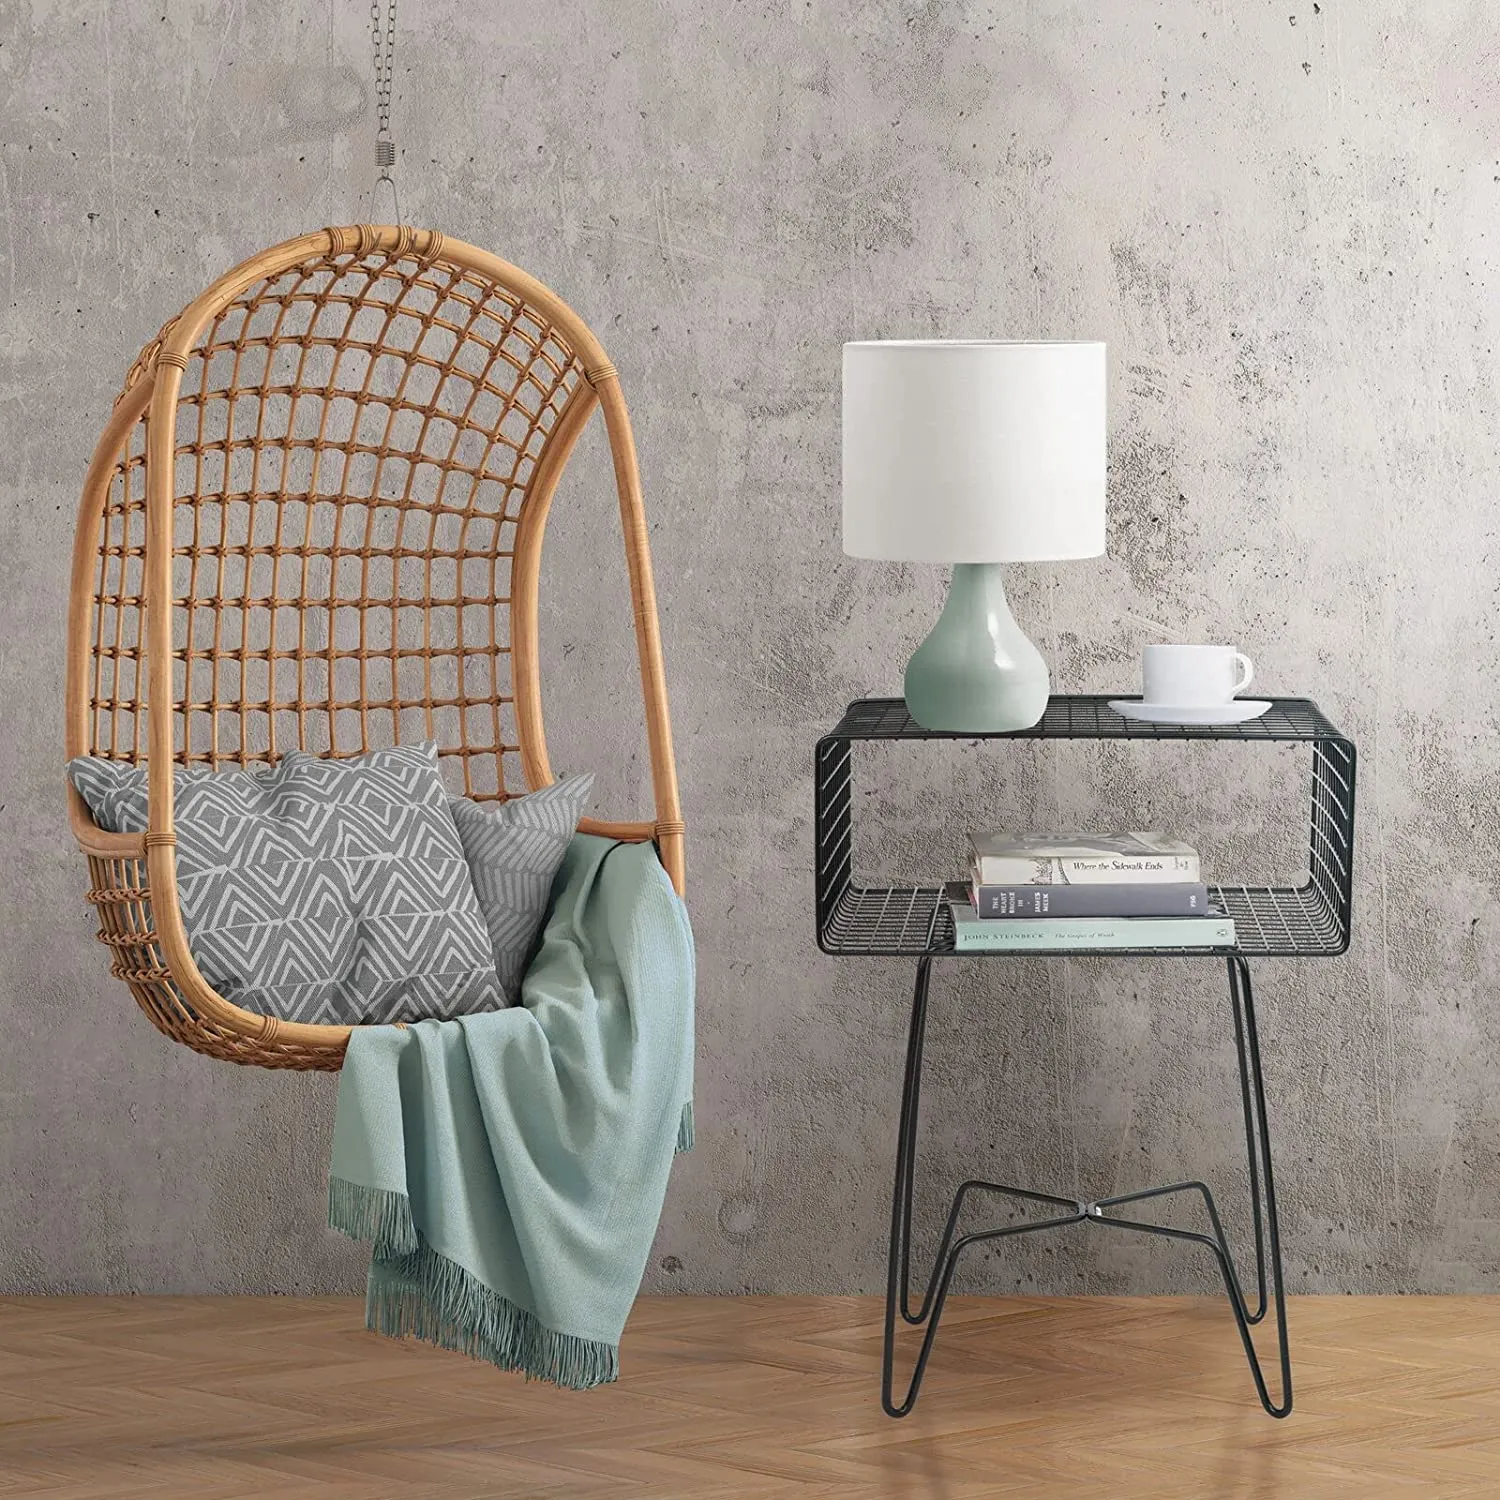 Black wire bedside table with a quirky design